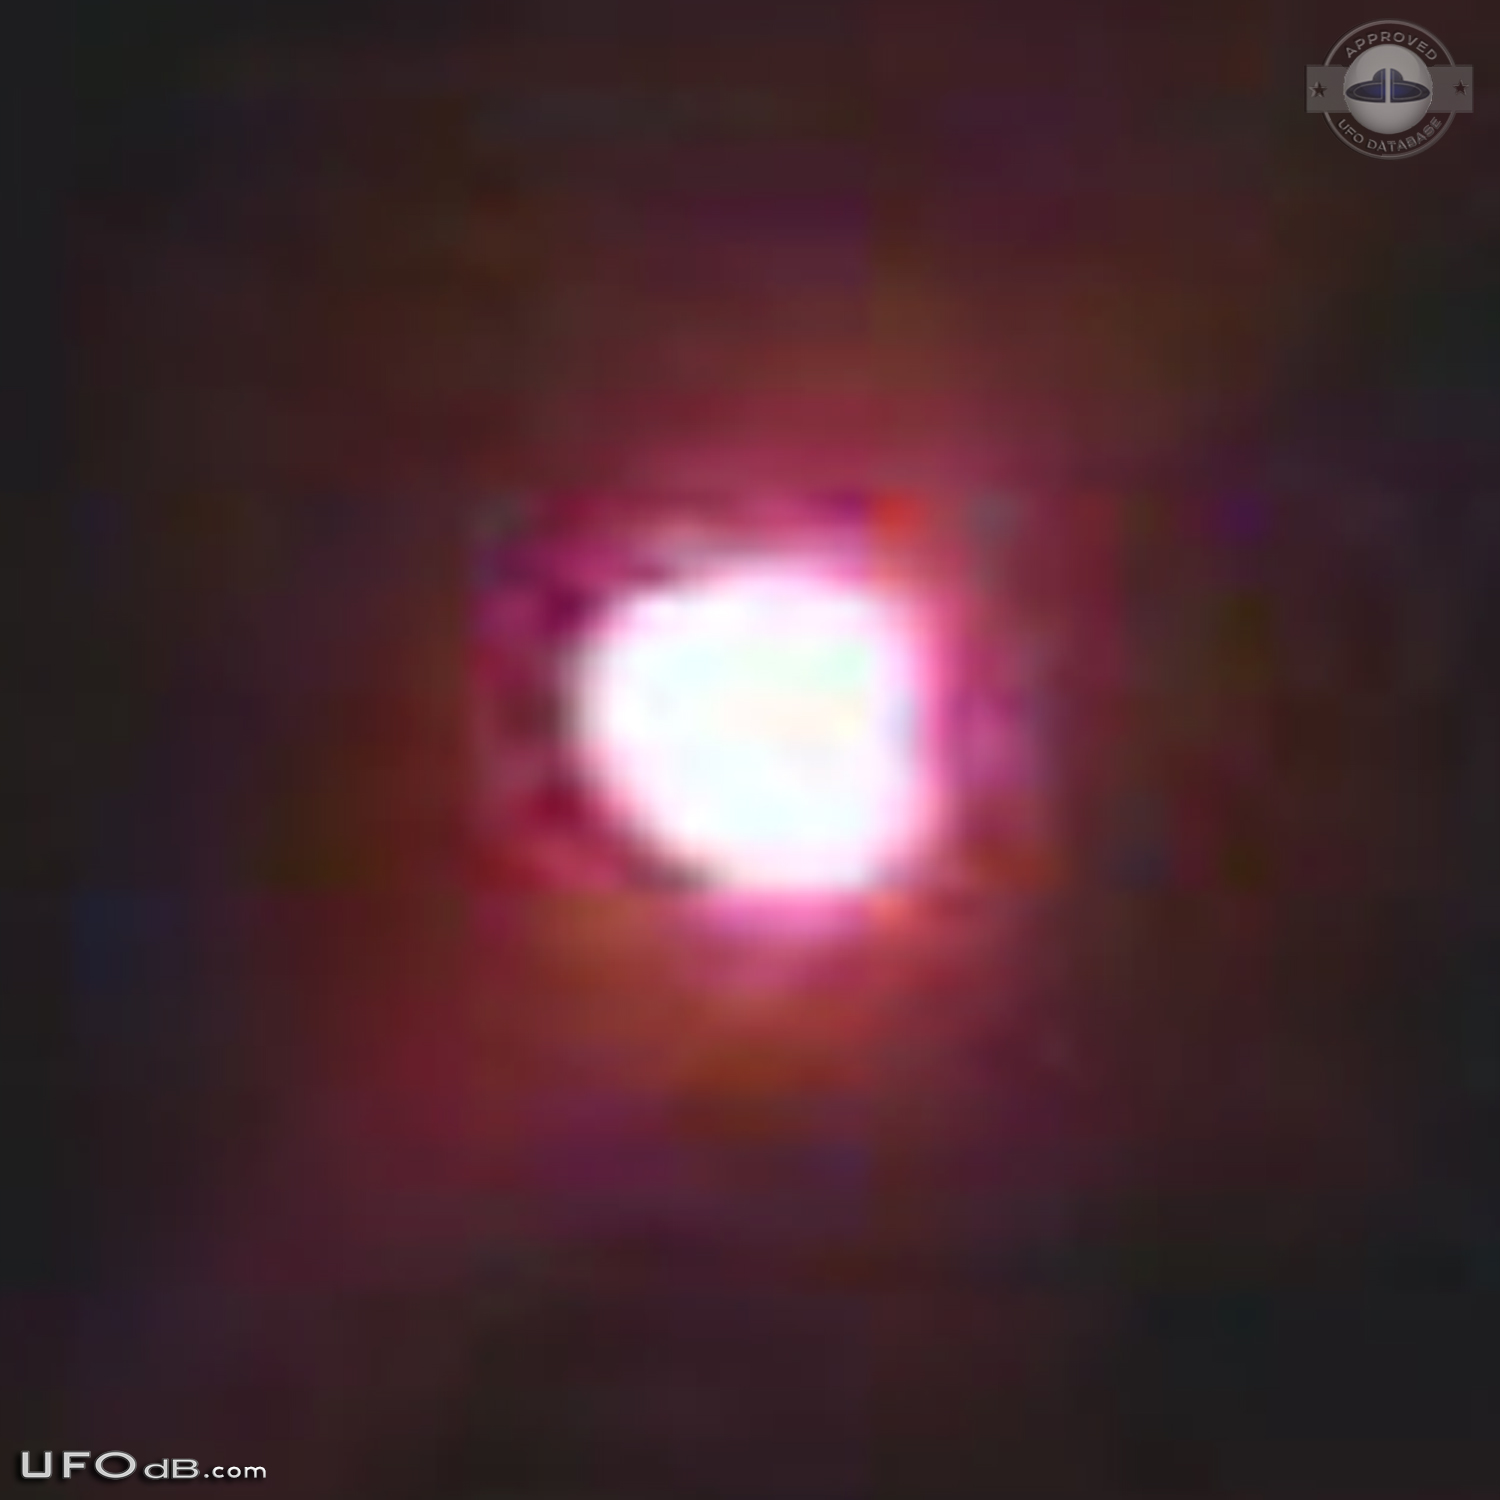 Bright glowing hovering sphere UFO over St Louis Missouri - 2014 UFO Picture #560-5